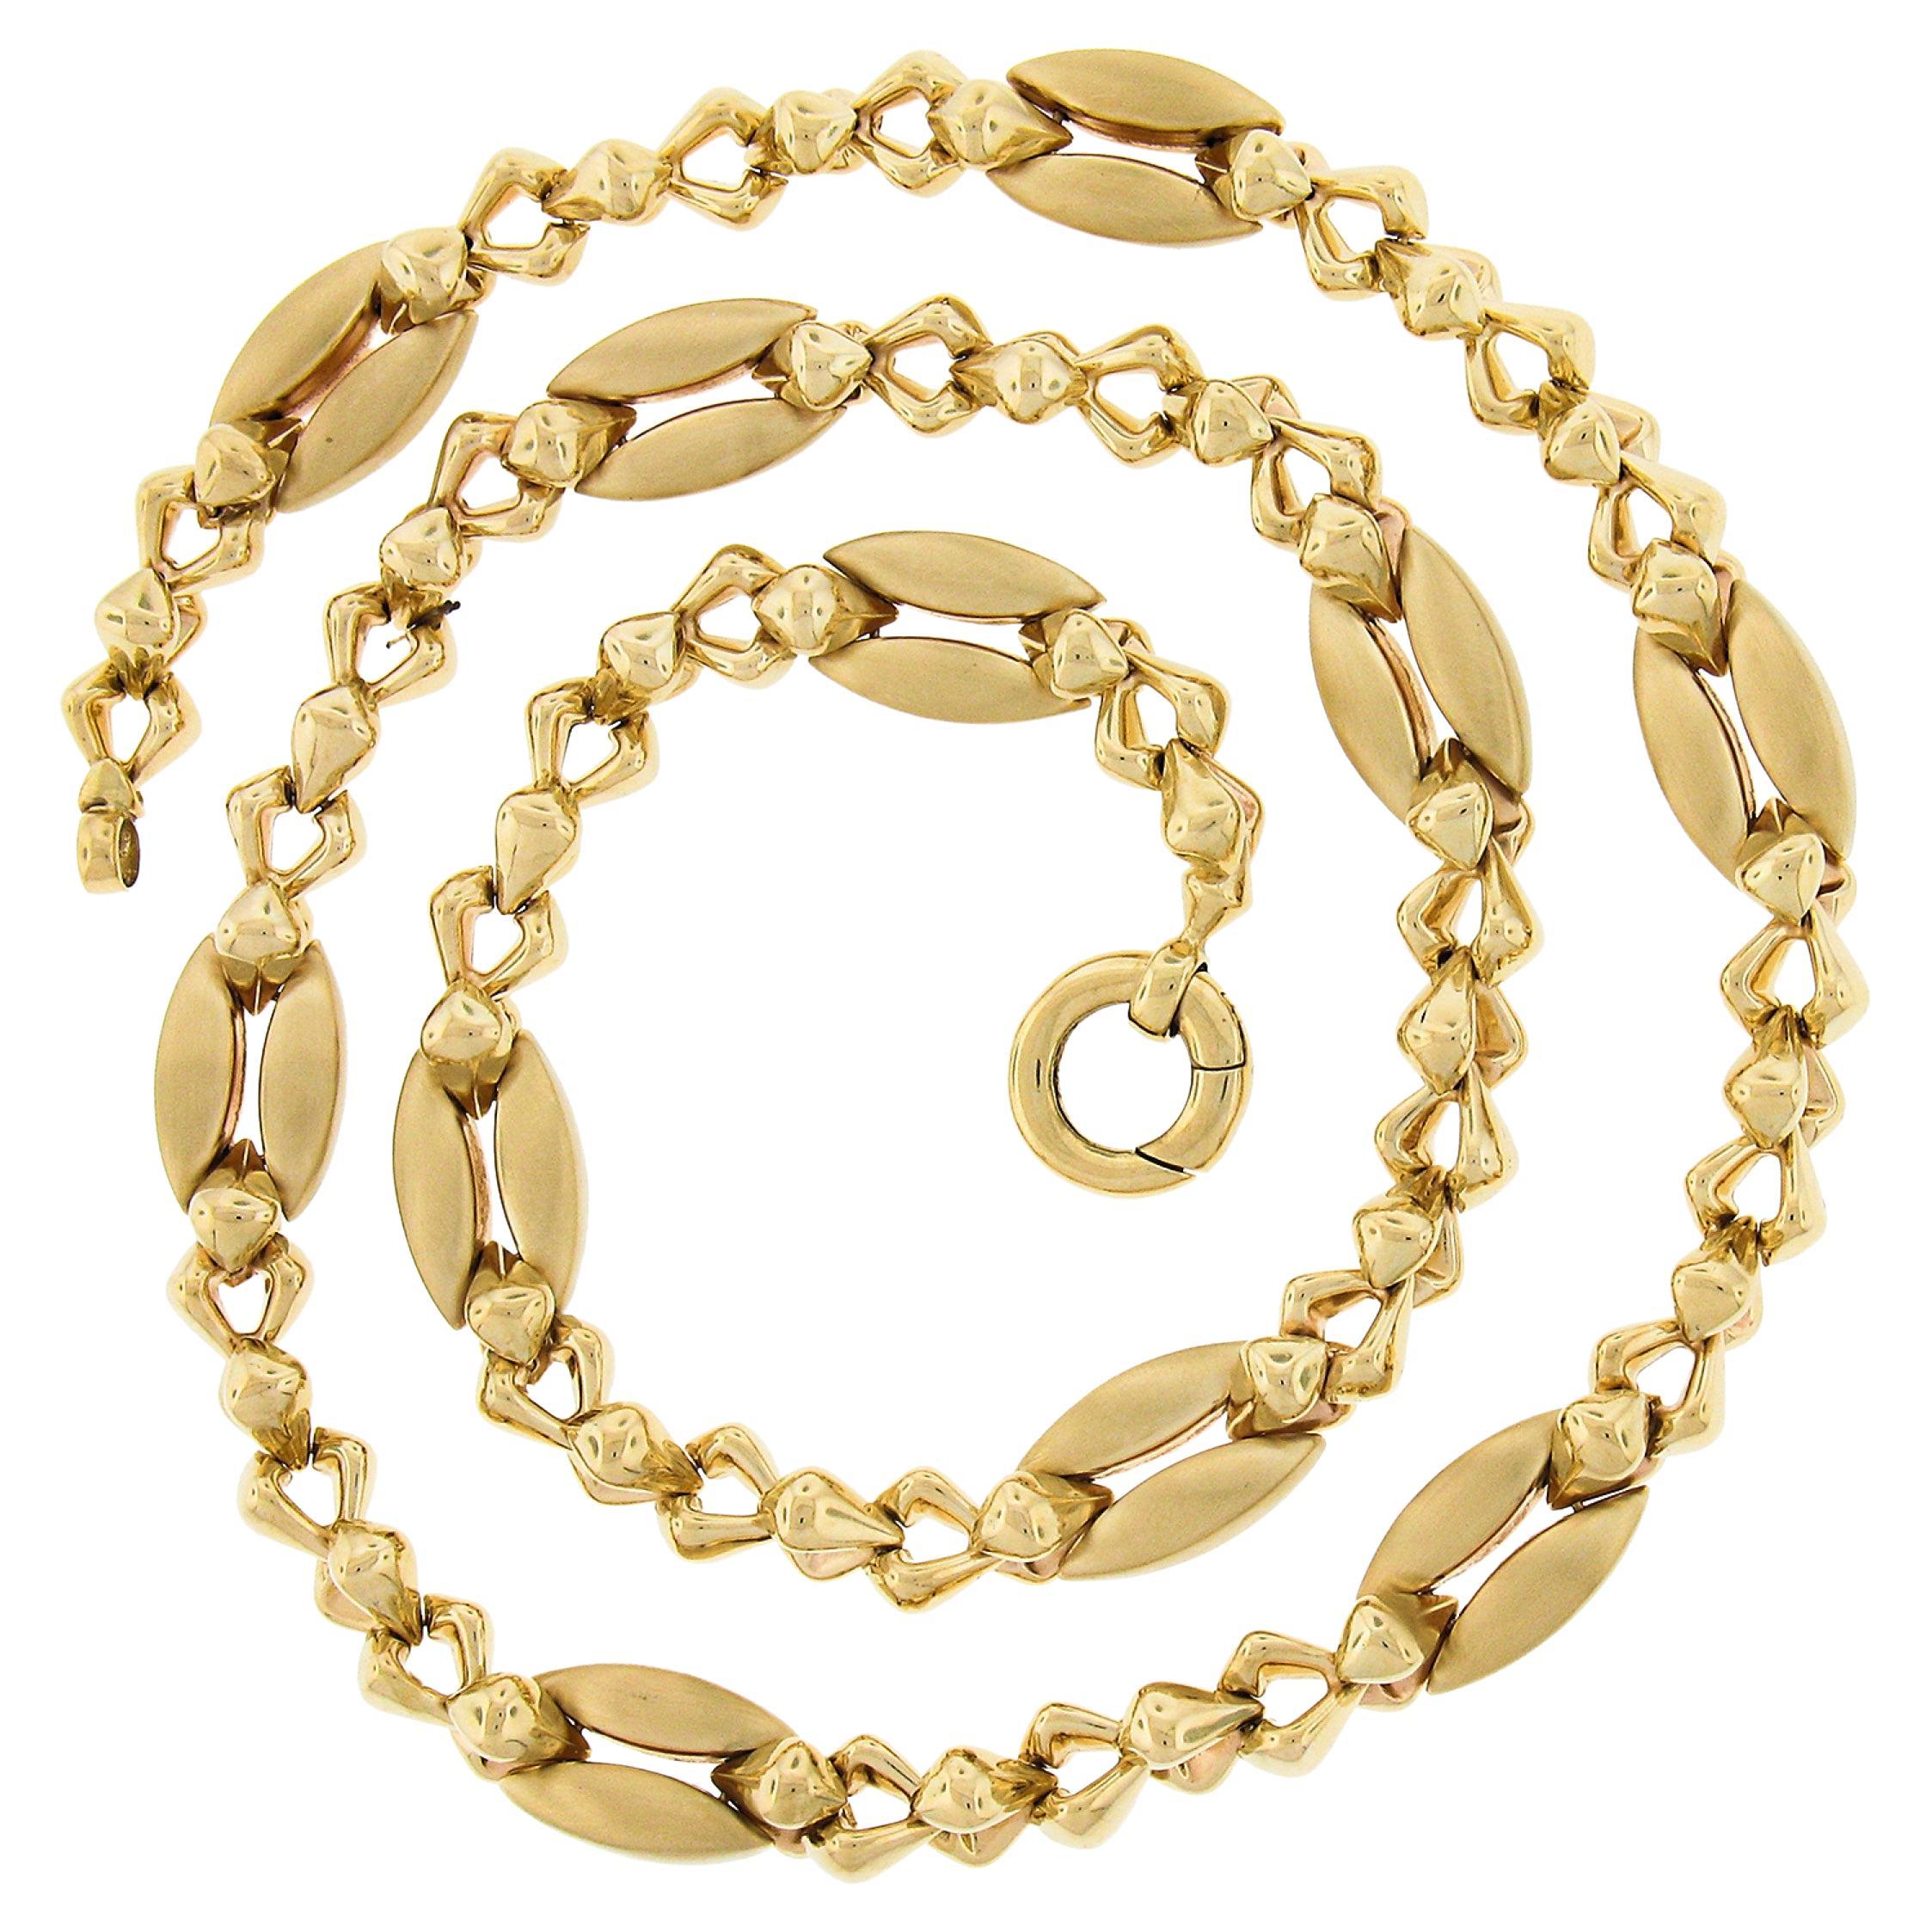 Fancy 14K Gold Long Alternating Polished & Brushed Sections Link Chain Necklace